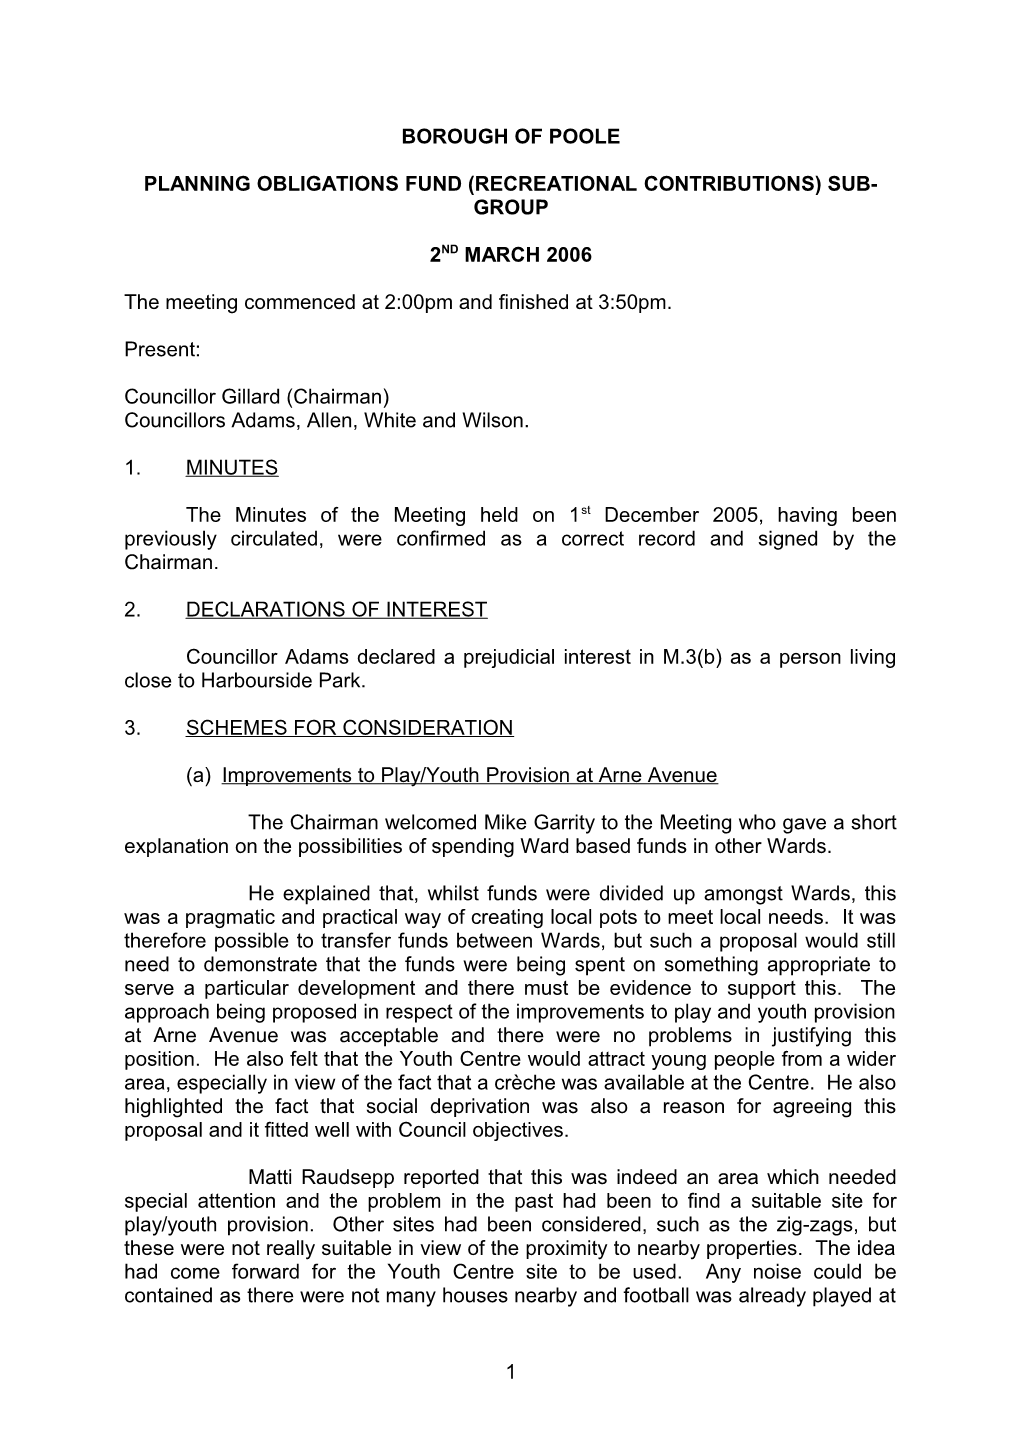 Report - Play and Youth Provision - 6 April 2006